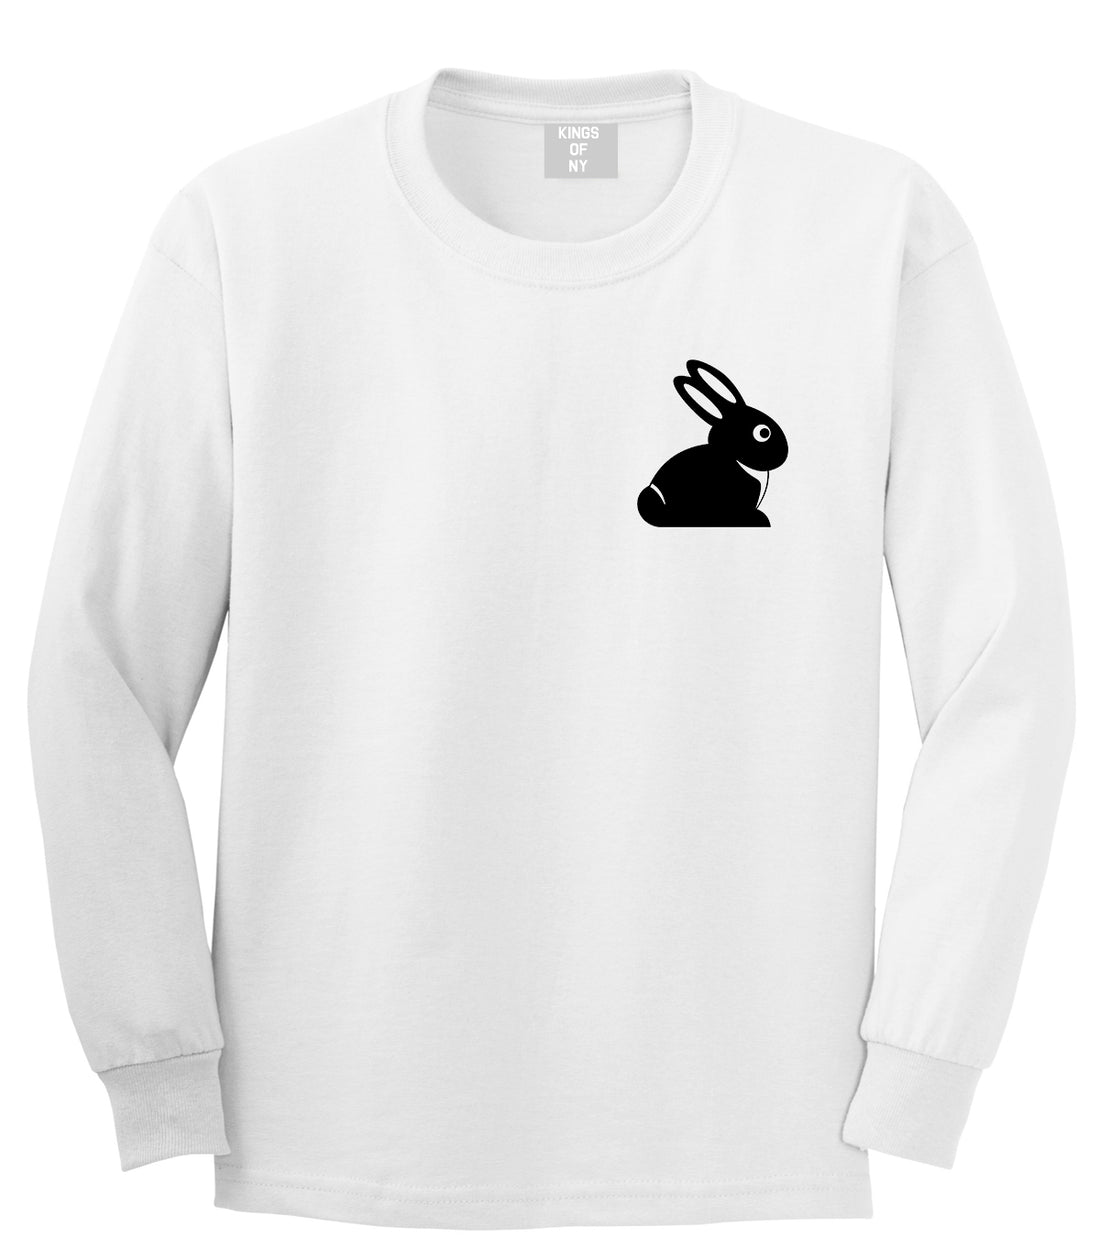 Easter Bunny Rabbit Chest Mens White Long Sleeve T-Shirt by Kings Of NY